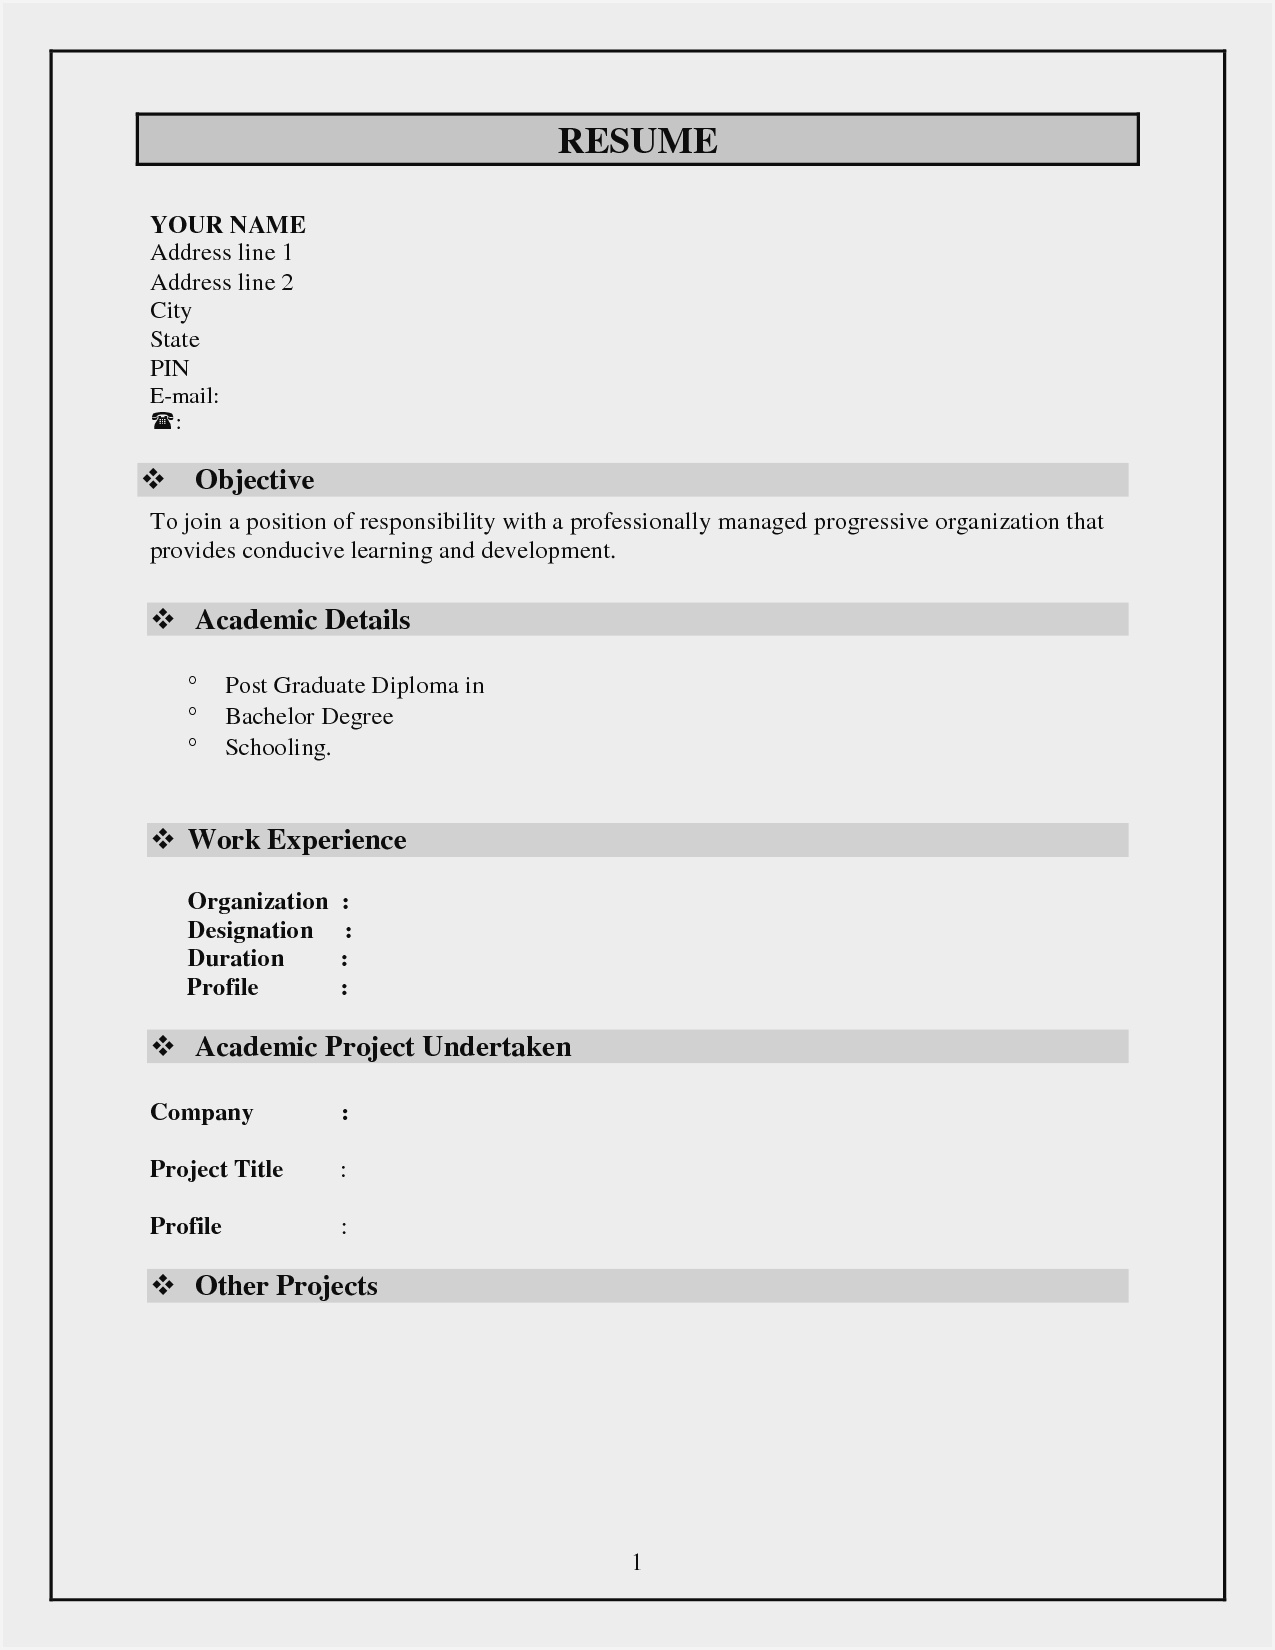 Resume Template Word Download Malaysia – Resume Sample Intended For Free Blank Resume Templates For Microsoft Word